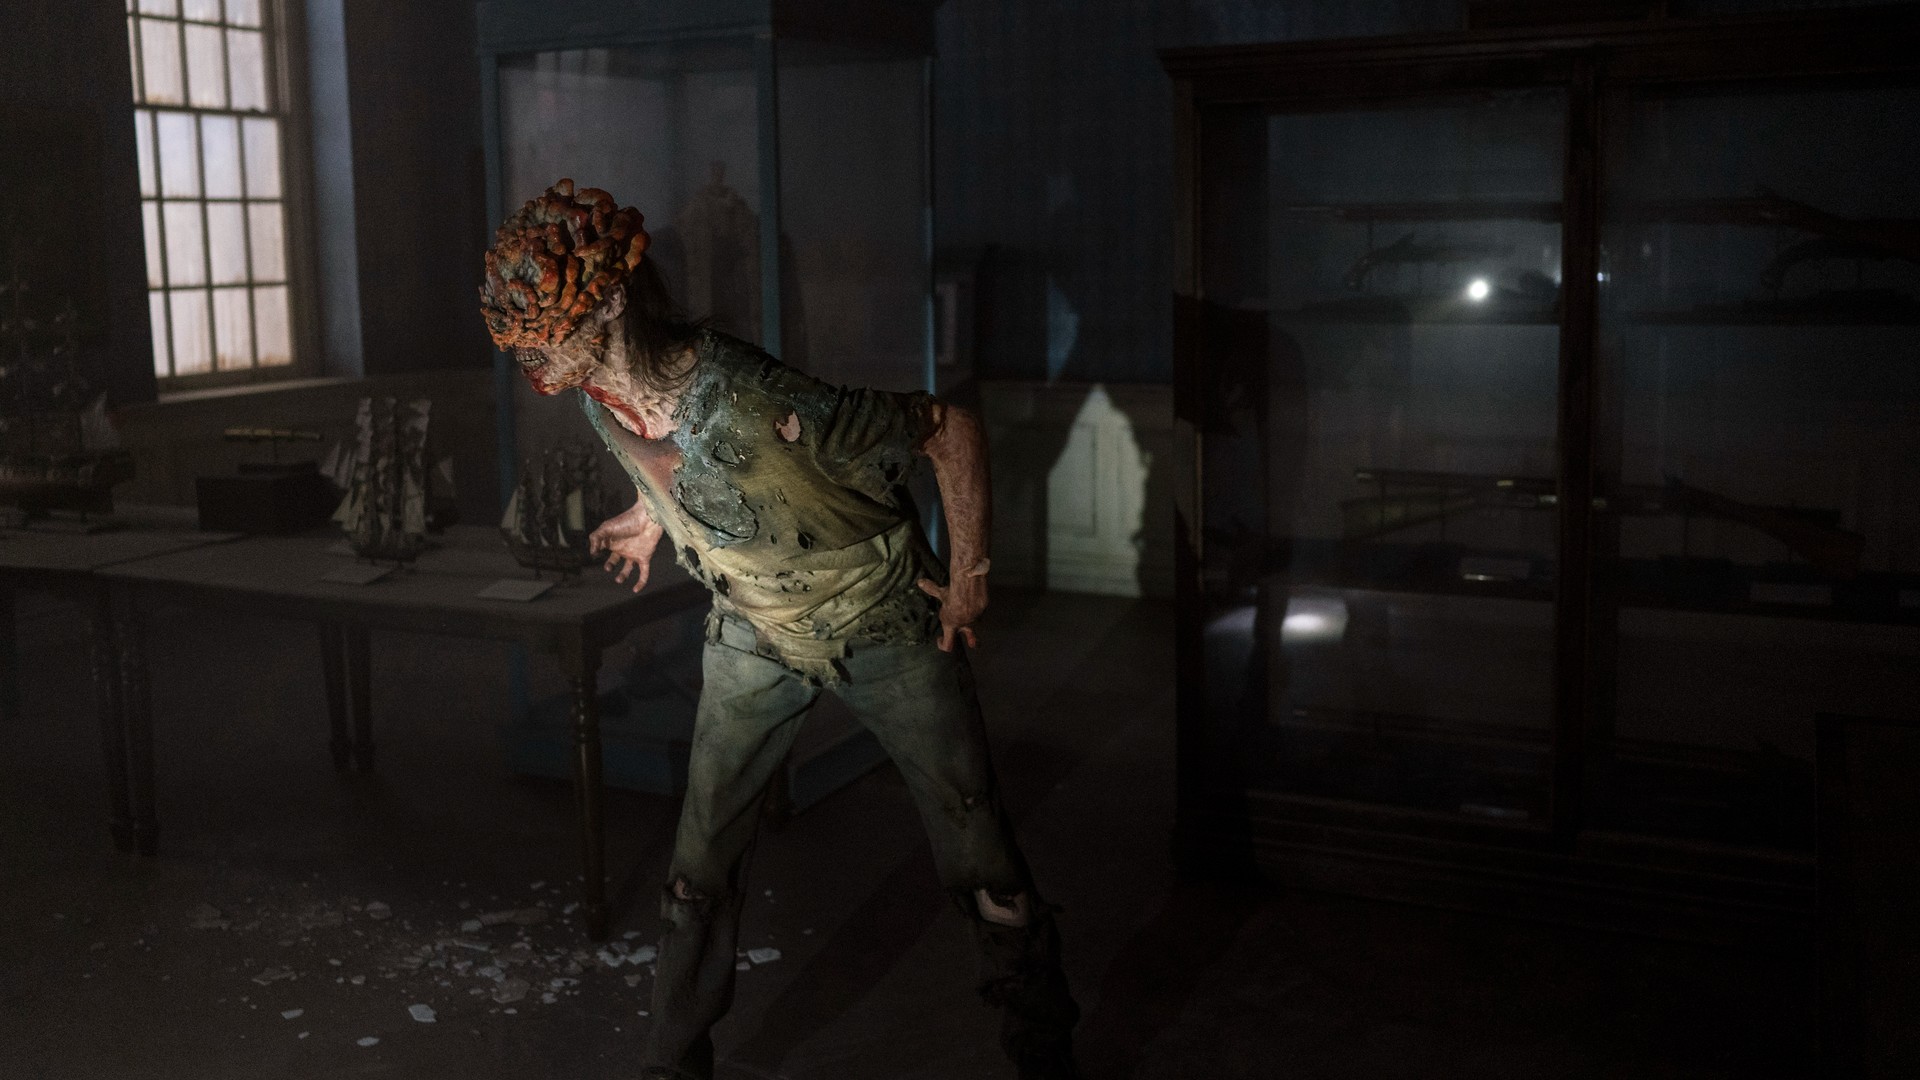 I Finished The Last Of Us II In Two Days, And I've Never Been So Angry At  A Video Game